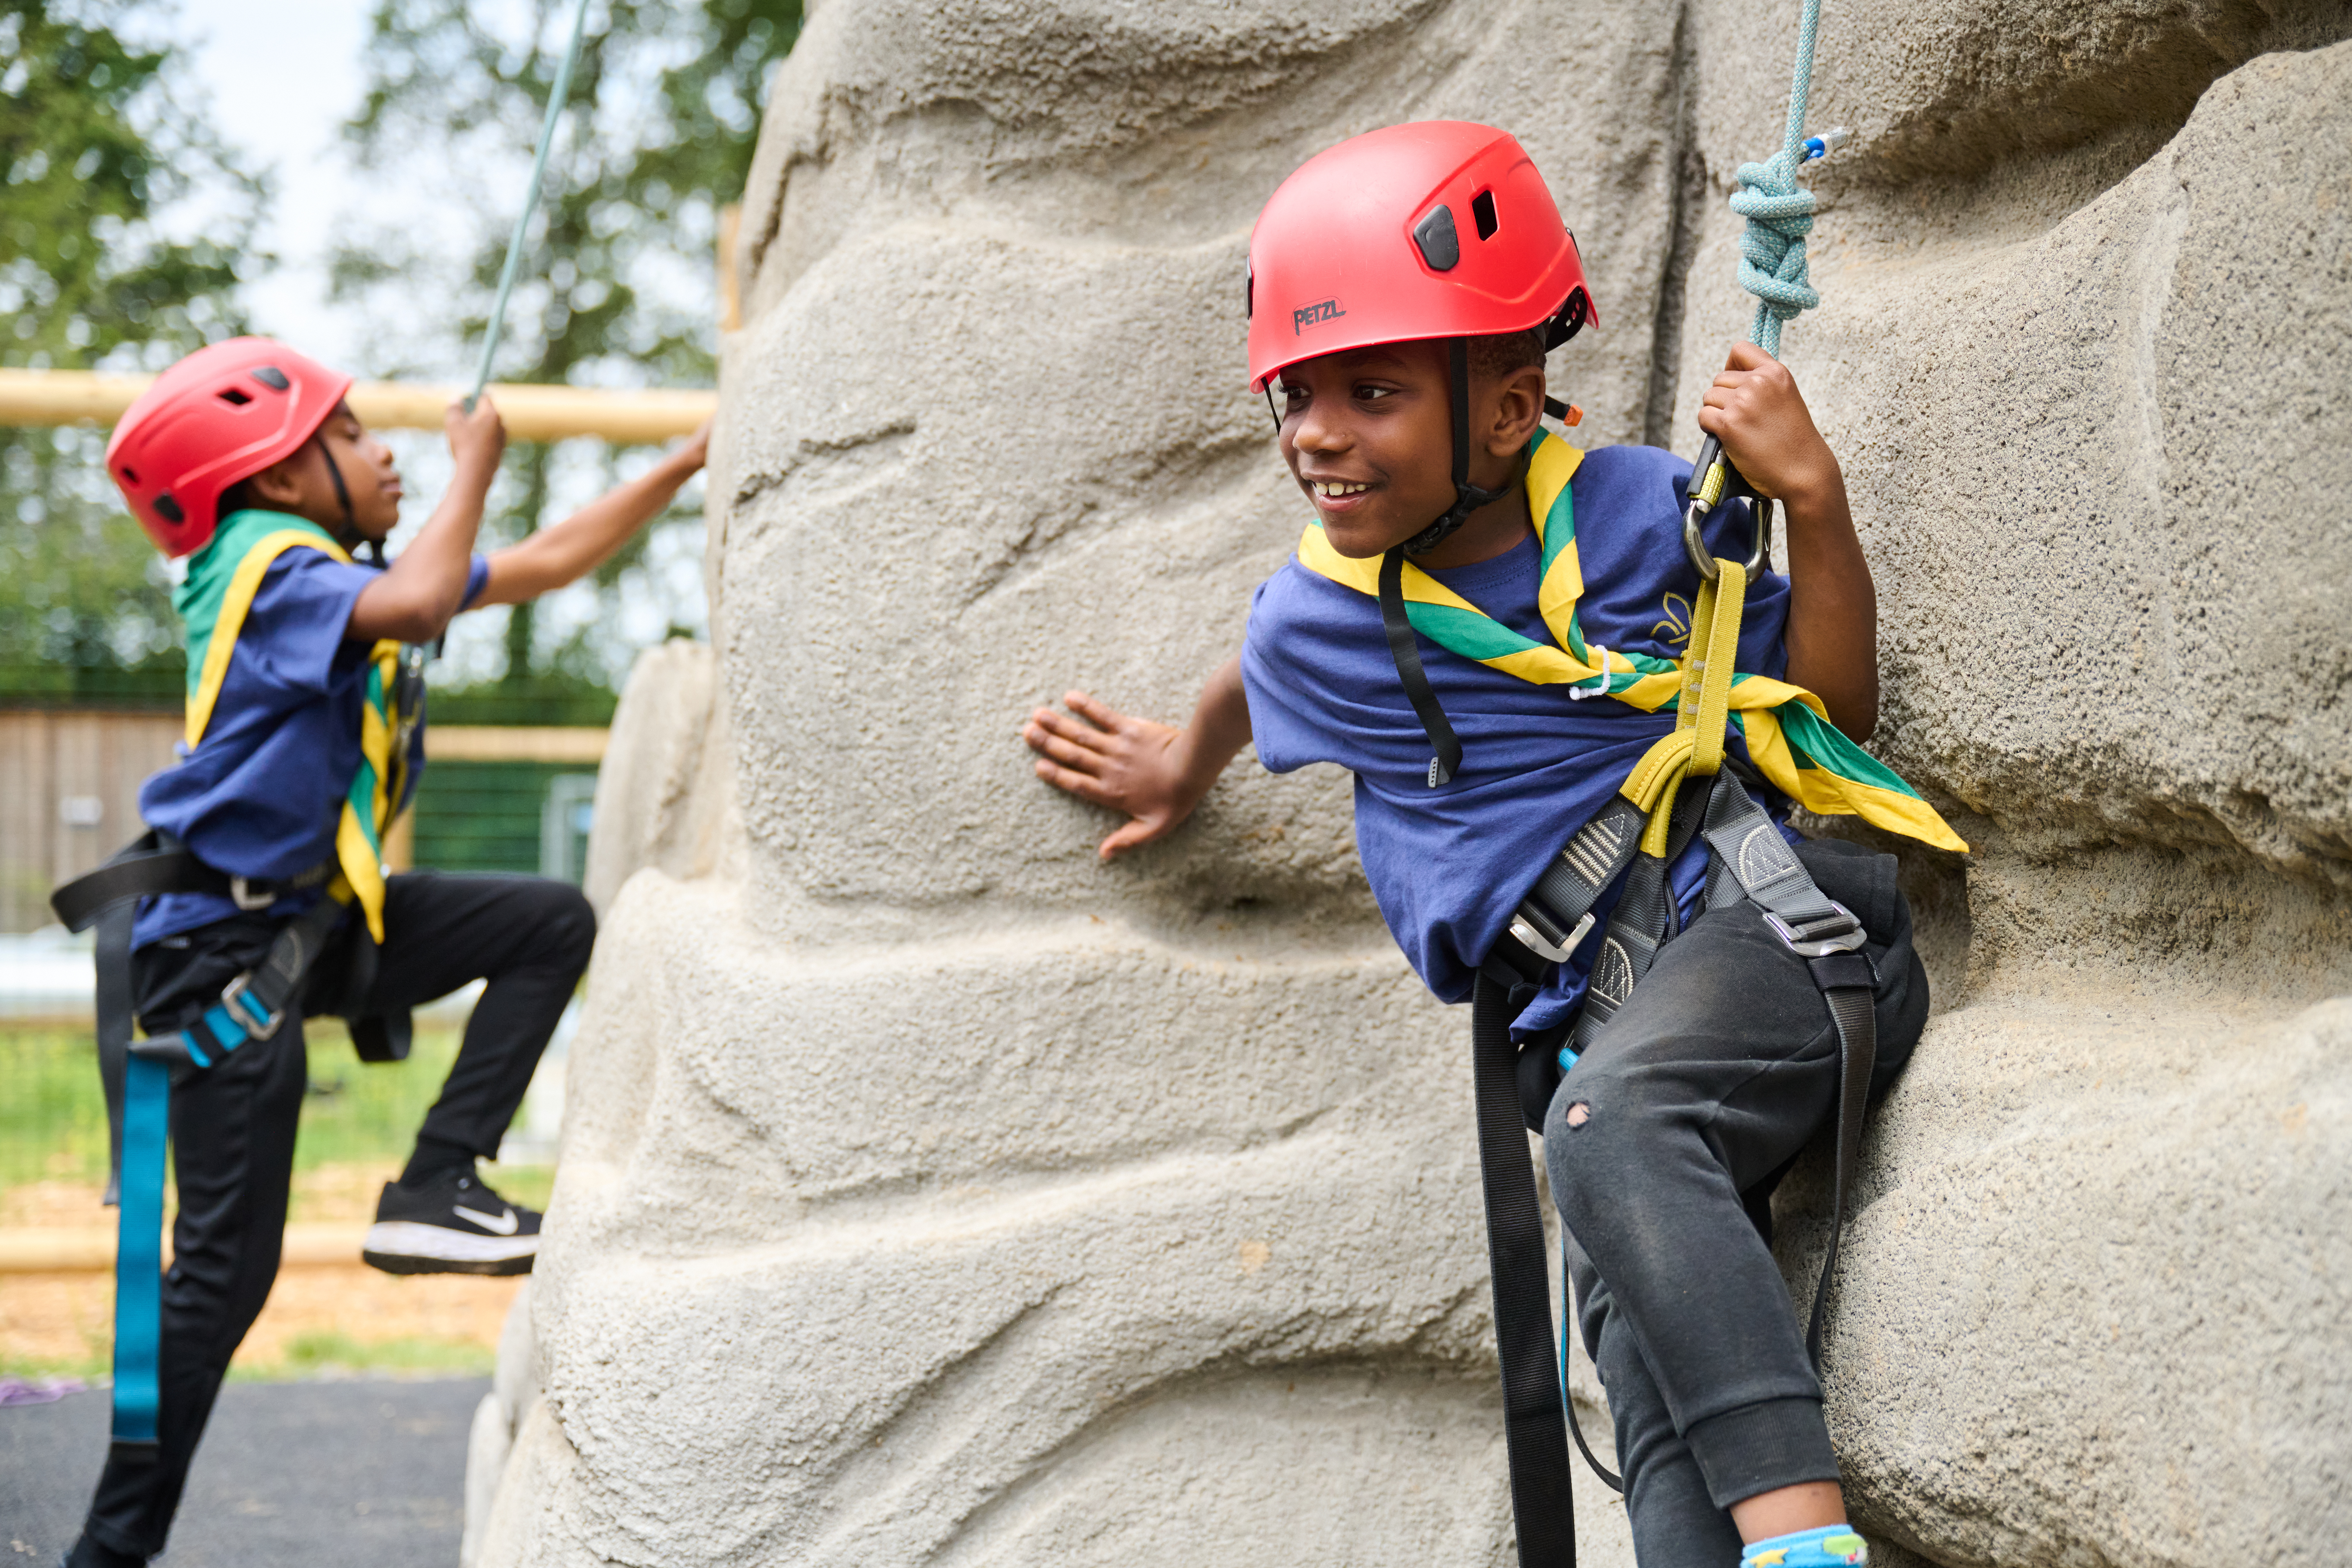 Two Scouts are wearing helmets, t-shirts and neckers while attached to rope near a climbing rock. The Scout to the left has their left leg on the rock and is about to start climbing up, and the Scout to the right is leaning on the rock with their left hand against the rock to support them.